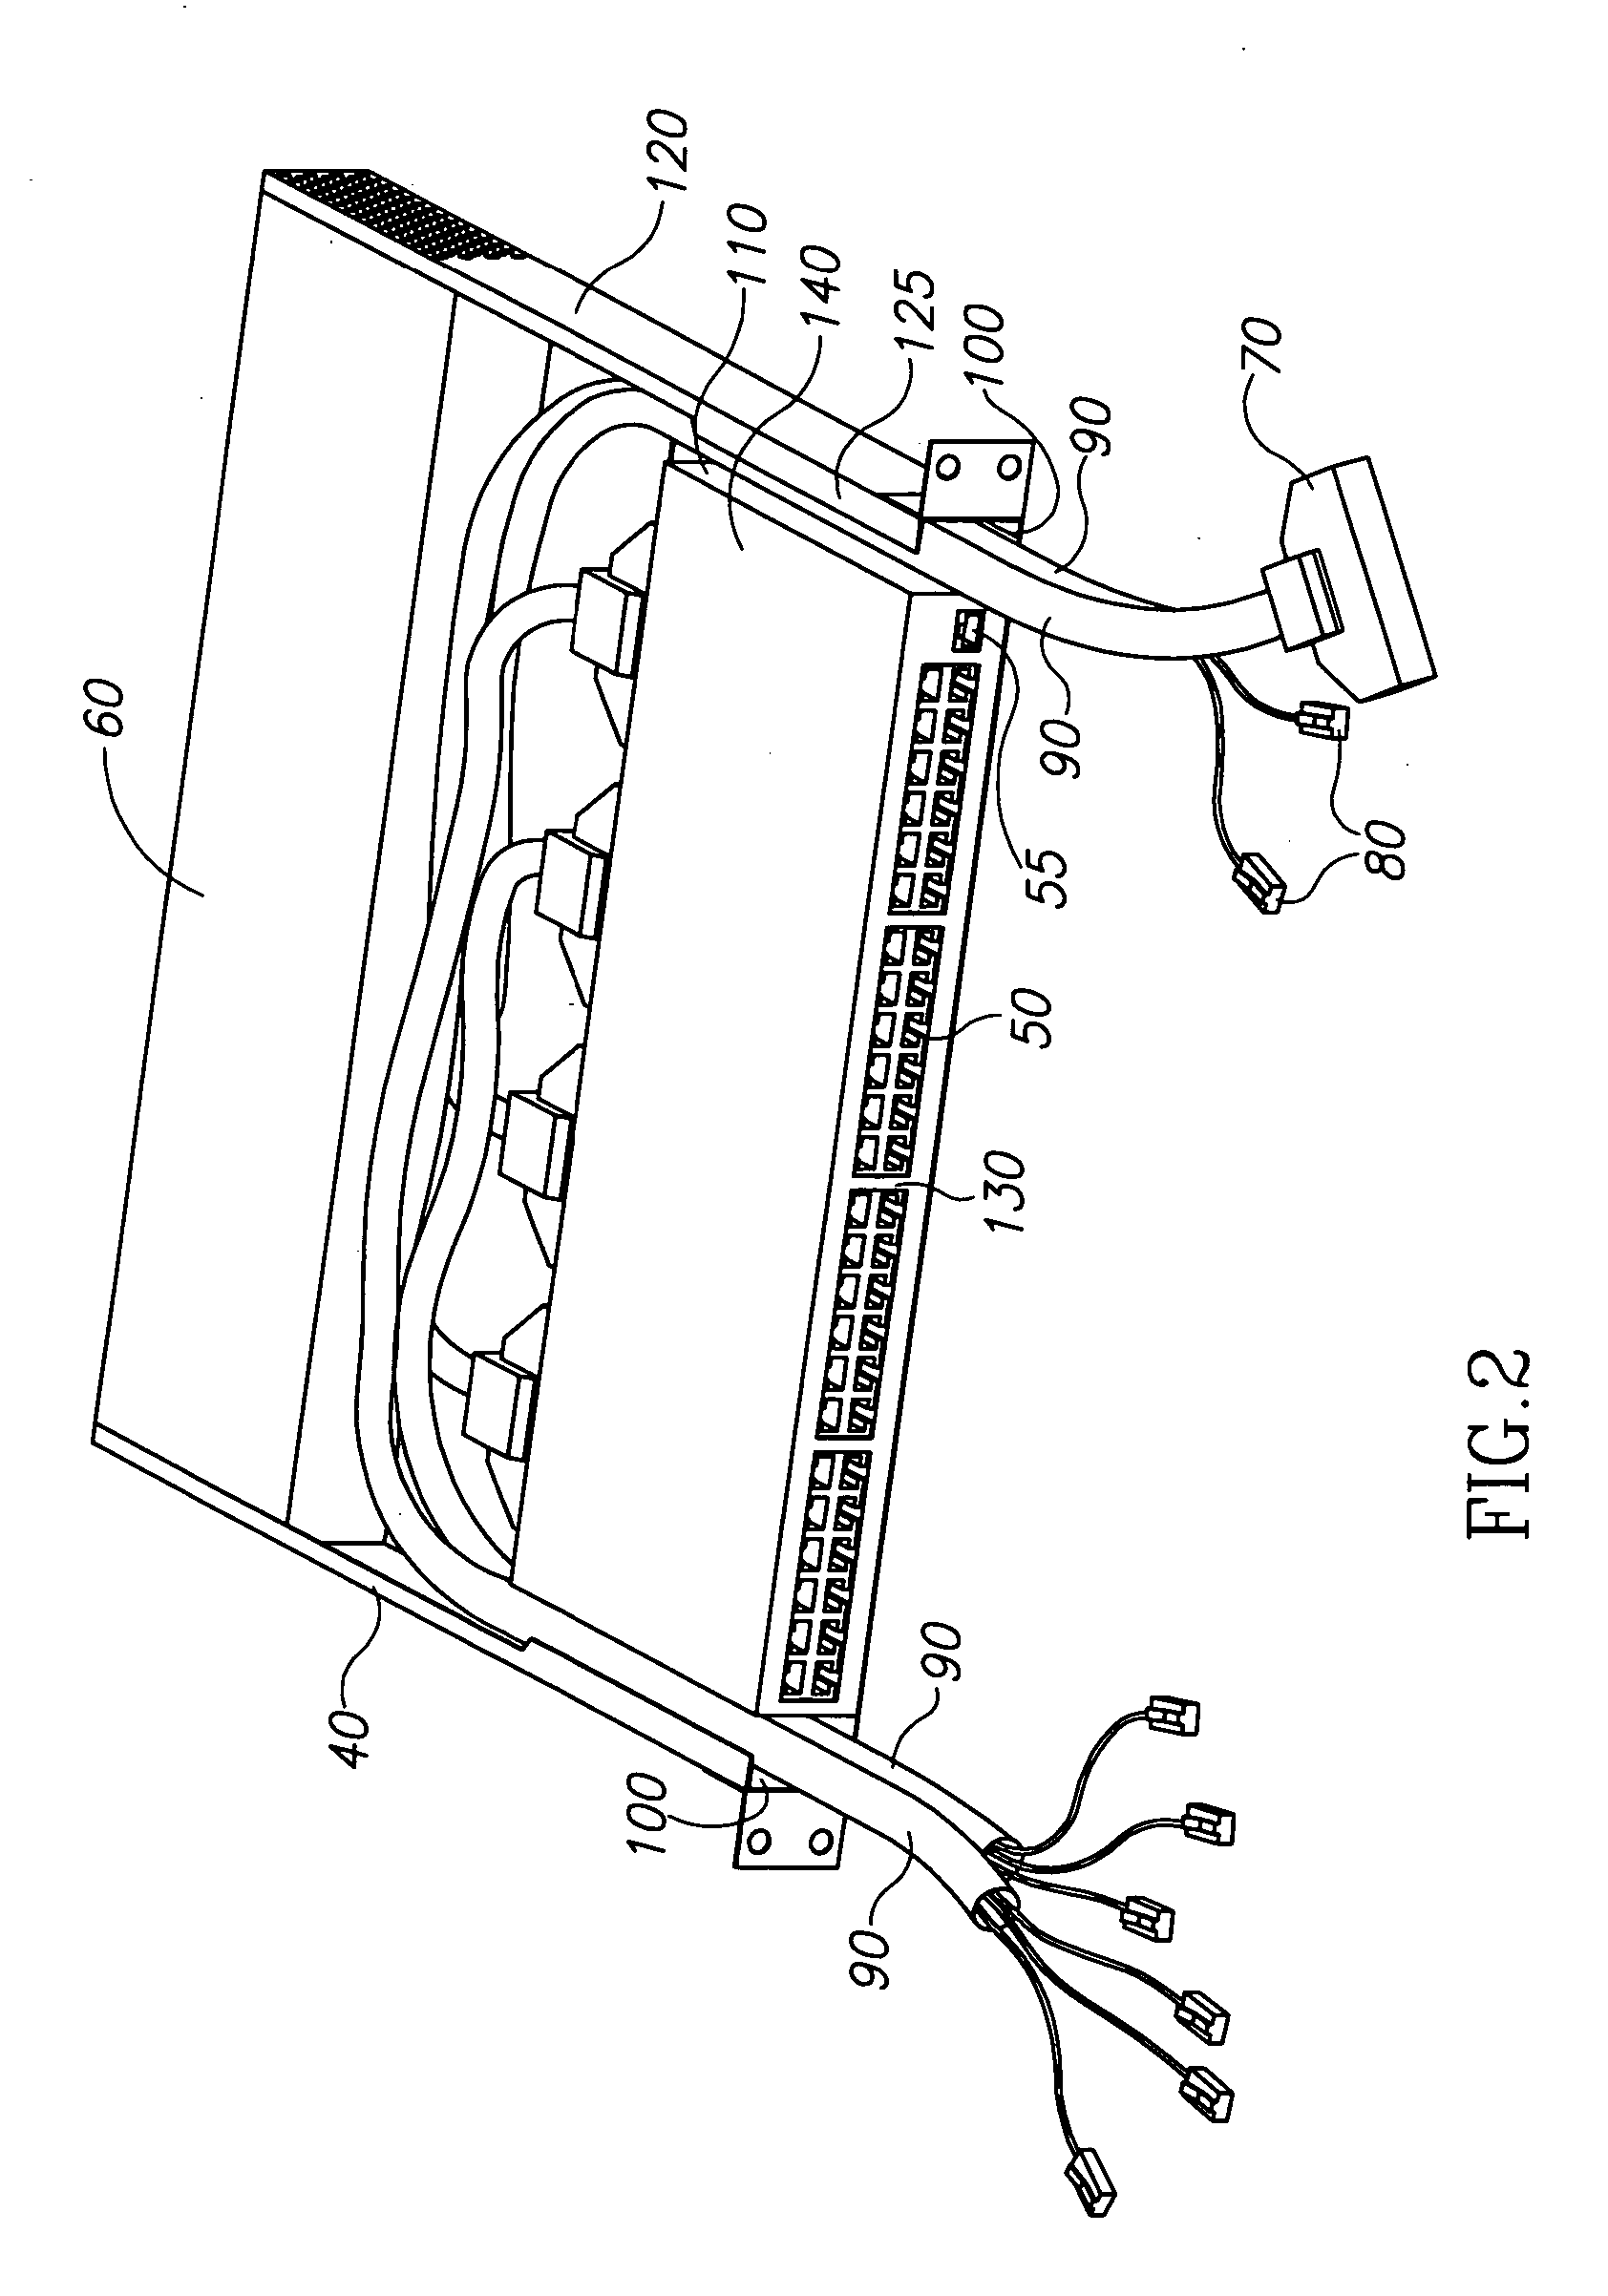 High density front access device